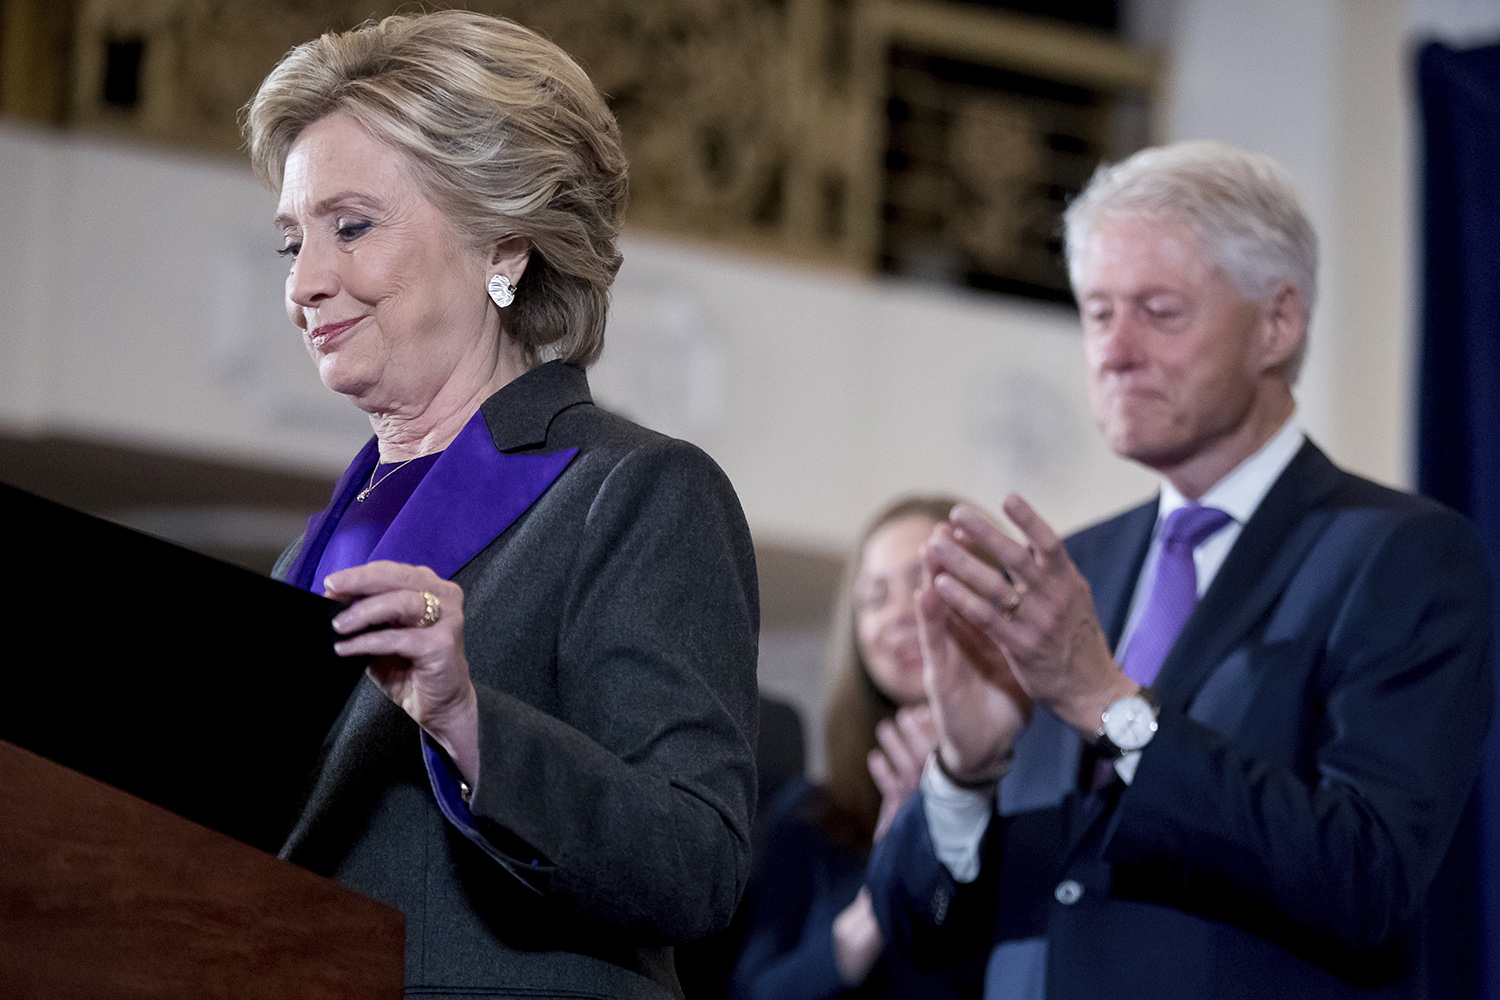 Hillary Clinton's concession speech was a humanizing moment that marked peak Clinton. Too bad it came at the tail end of her political career. (AP Photo)